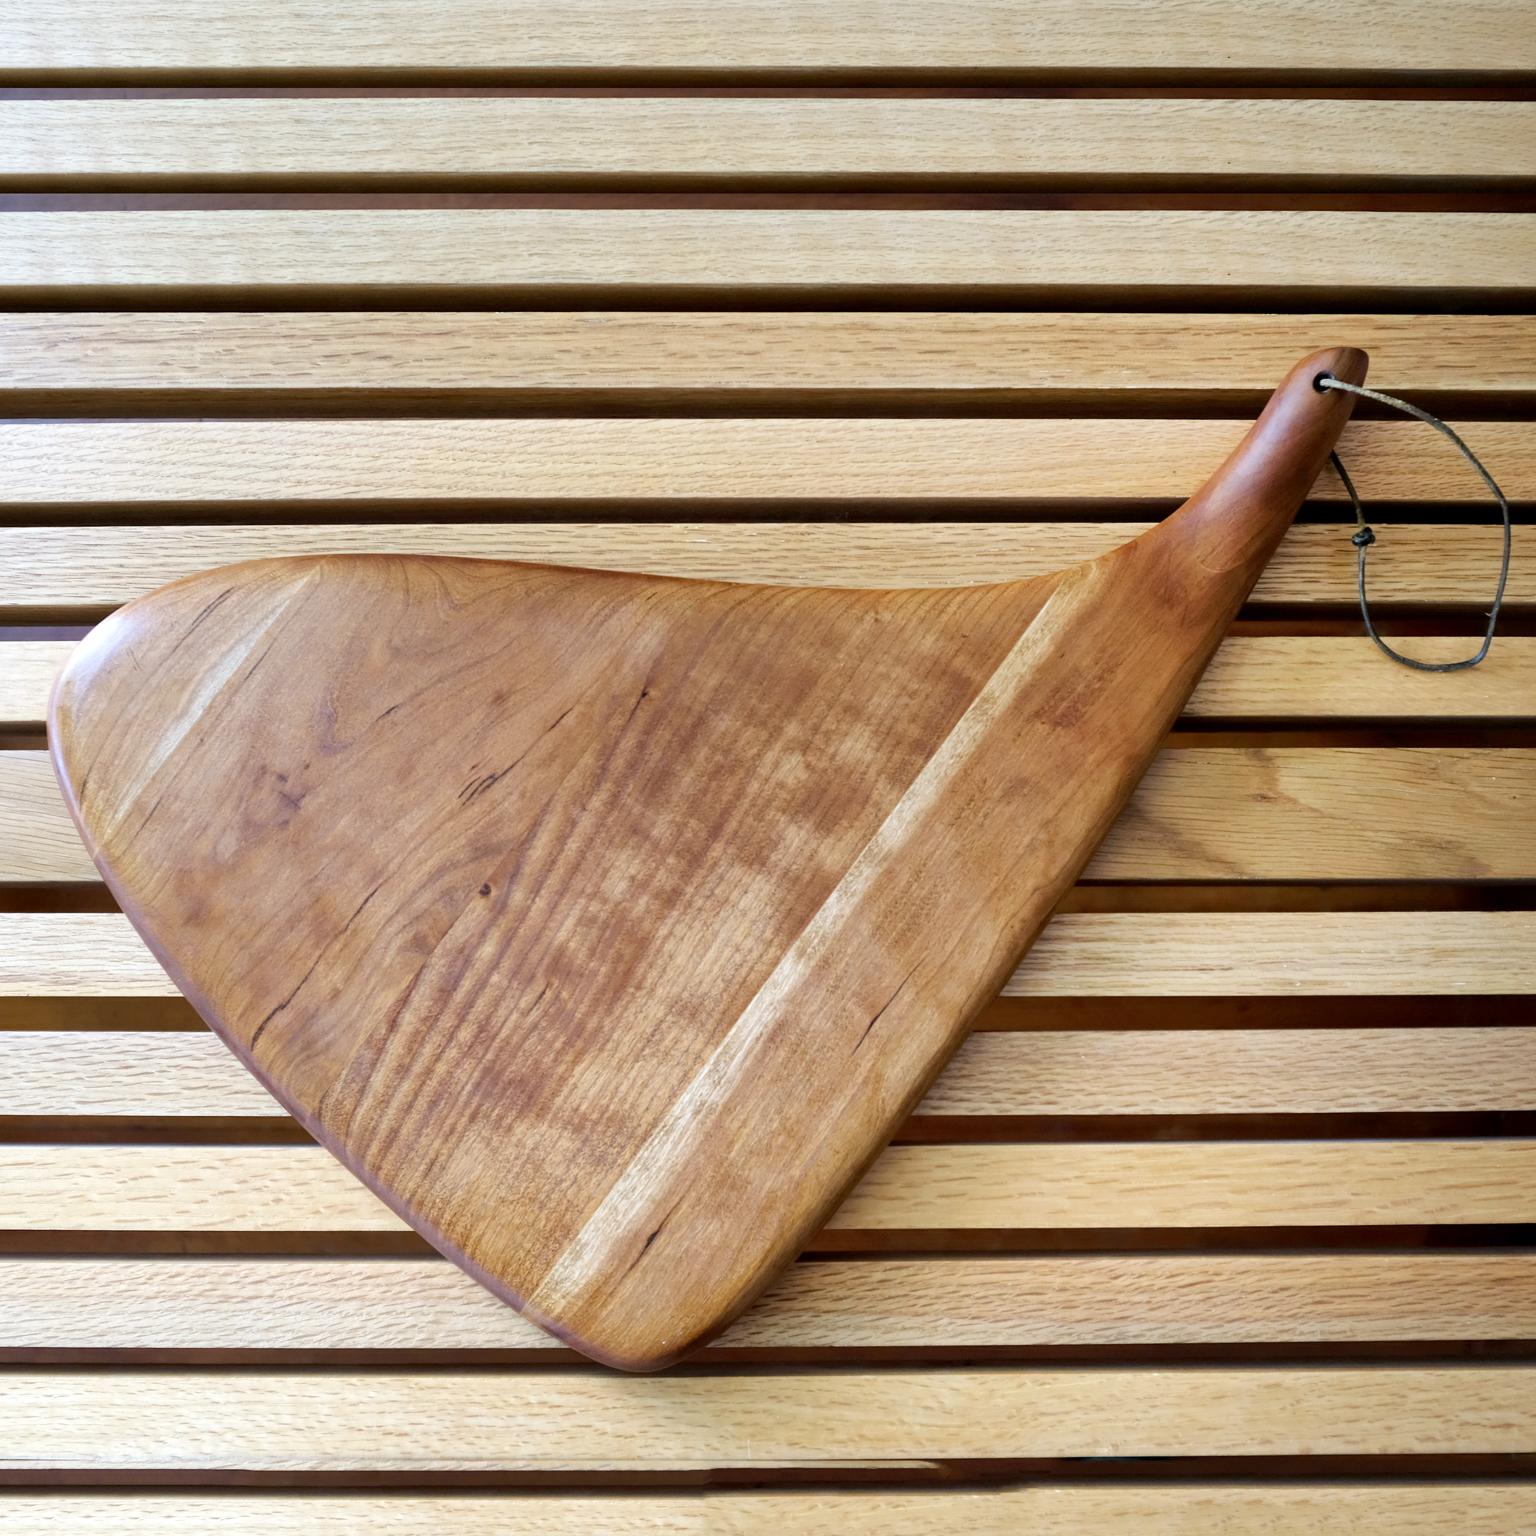 Beautiful carved wood cutting or serving board by Dean Santner. 

Dean Santner – East Bay designer-craftsmen know for his finely crafted line of wood products from the late 1970s and 1980s. 

From Santner promotional material: “Every design is